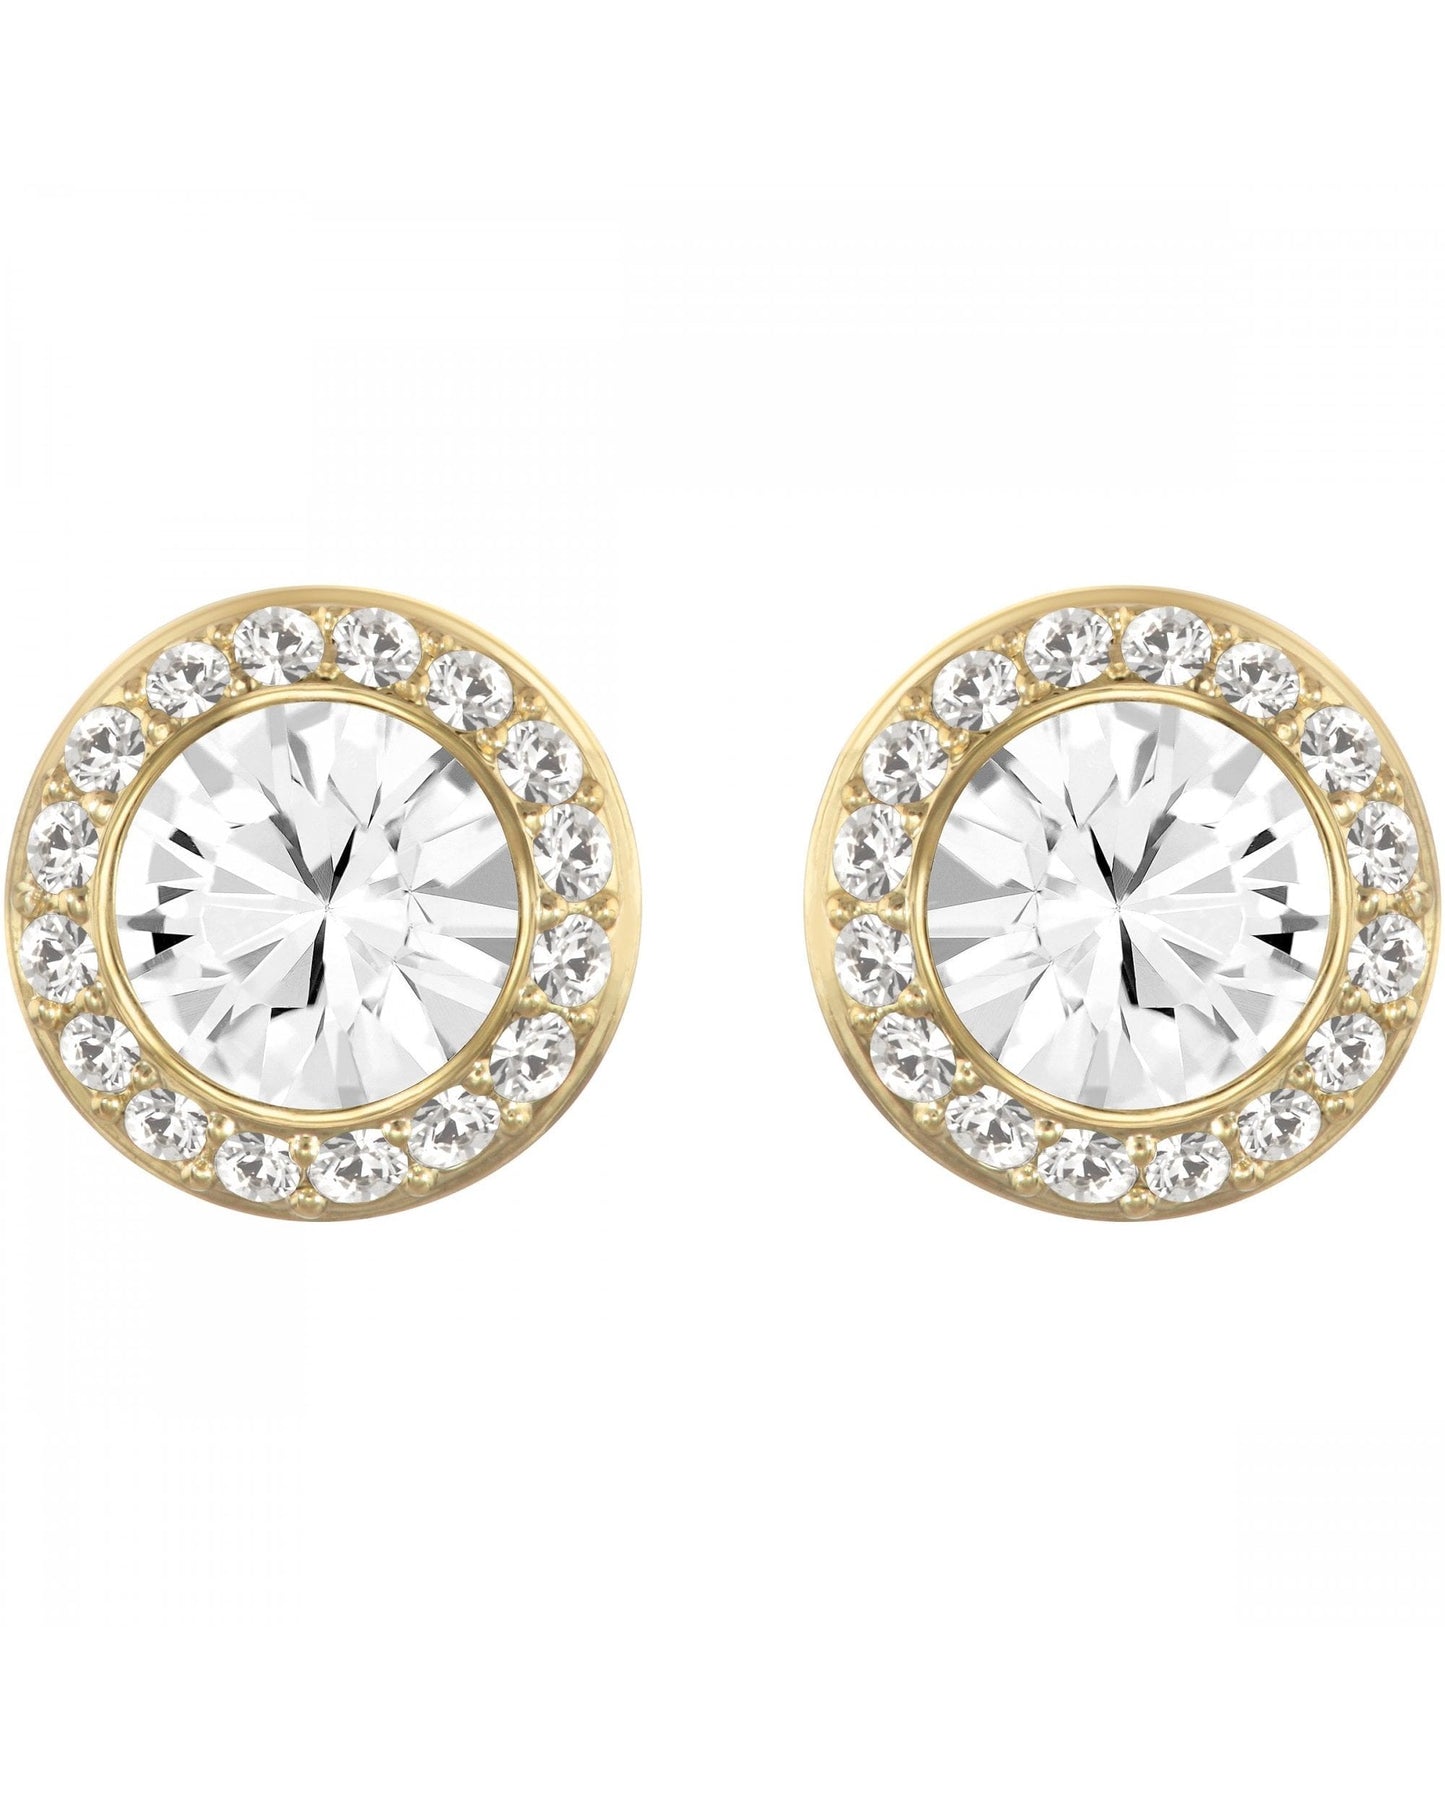 Angelic Stud Pierced Earrings- White and Gold Tone